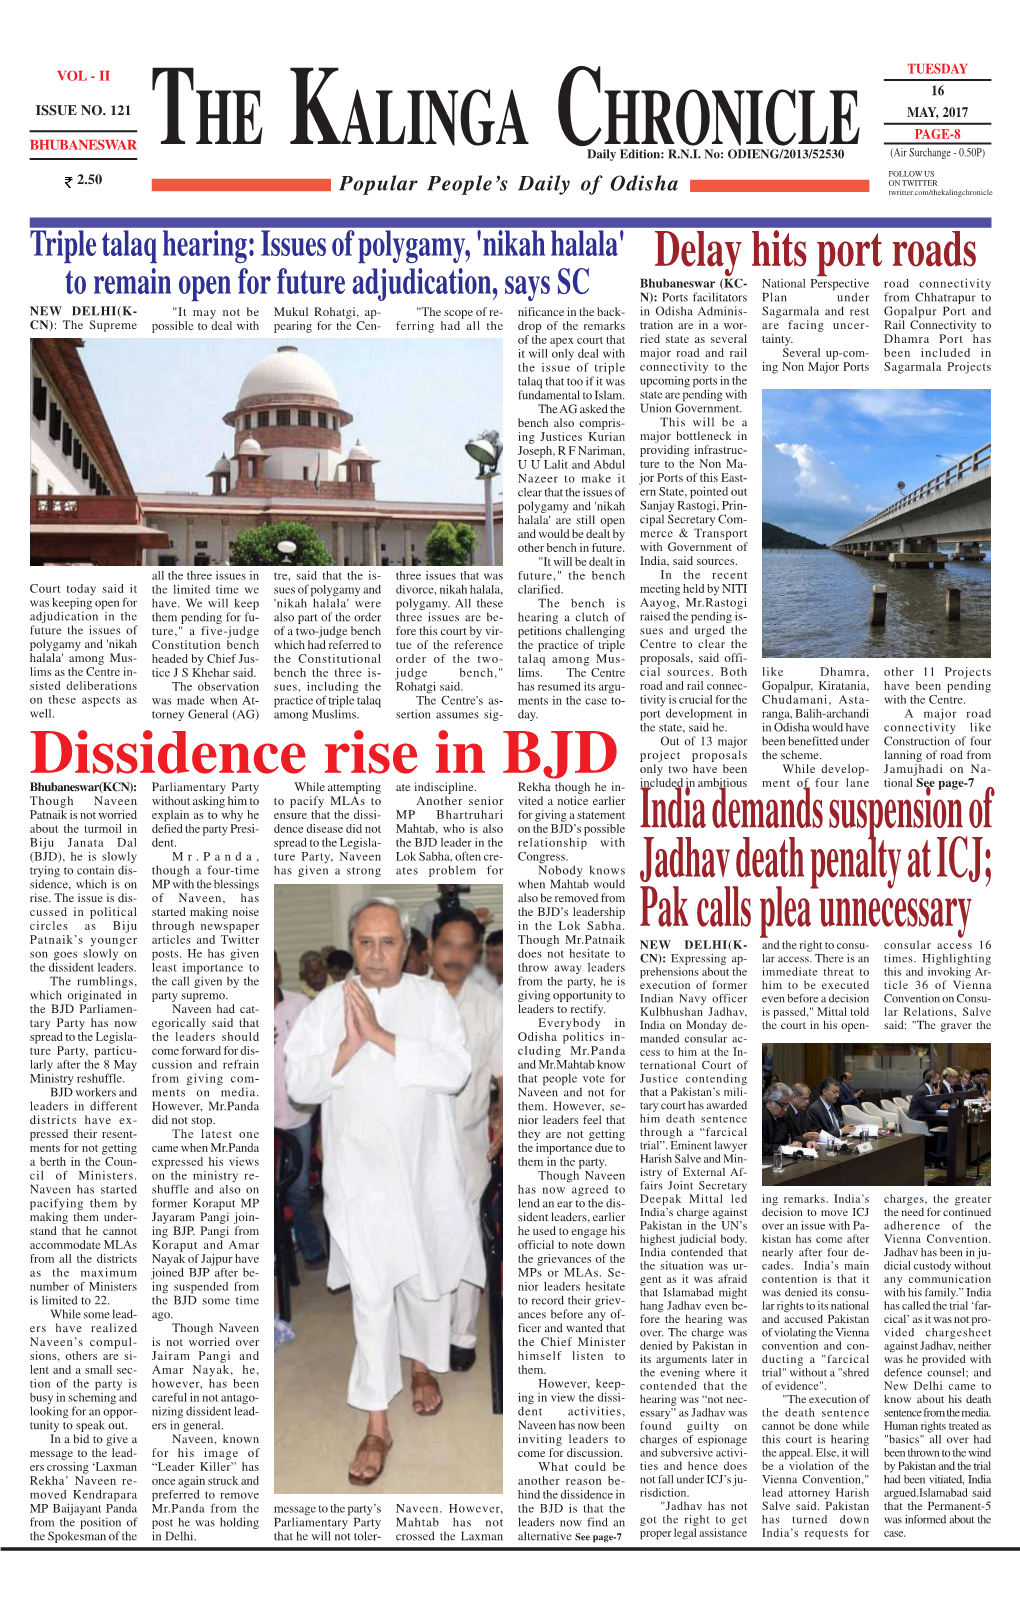 Dissidence Rise in BJD Only Two Have Been While Develop- Jamujhadi on Na- Bhubaneswar(KCN): Parliamentary Party While Attempting Ate Indiscipline